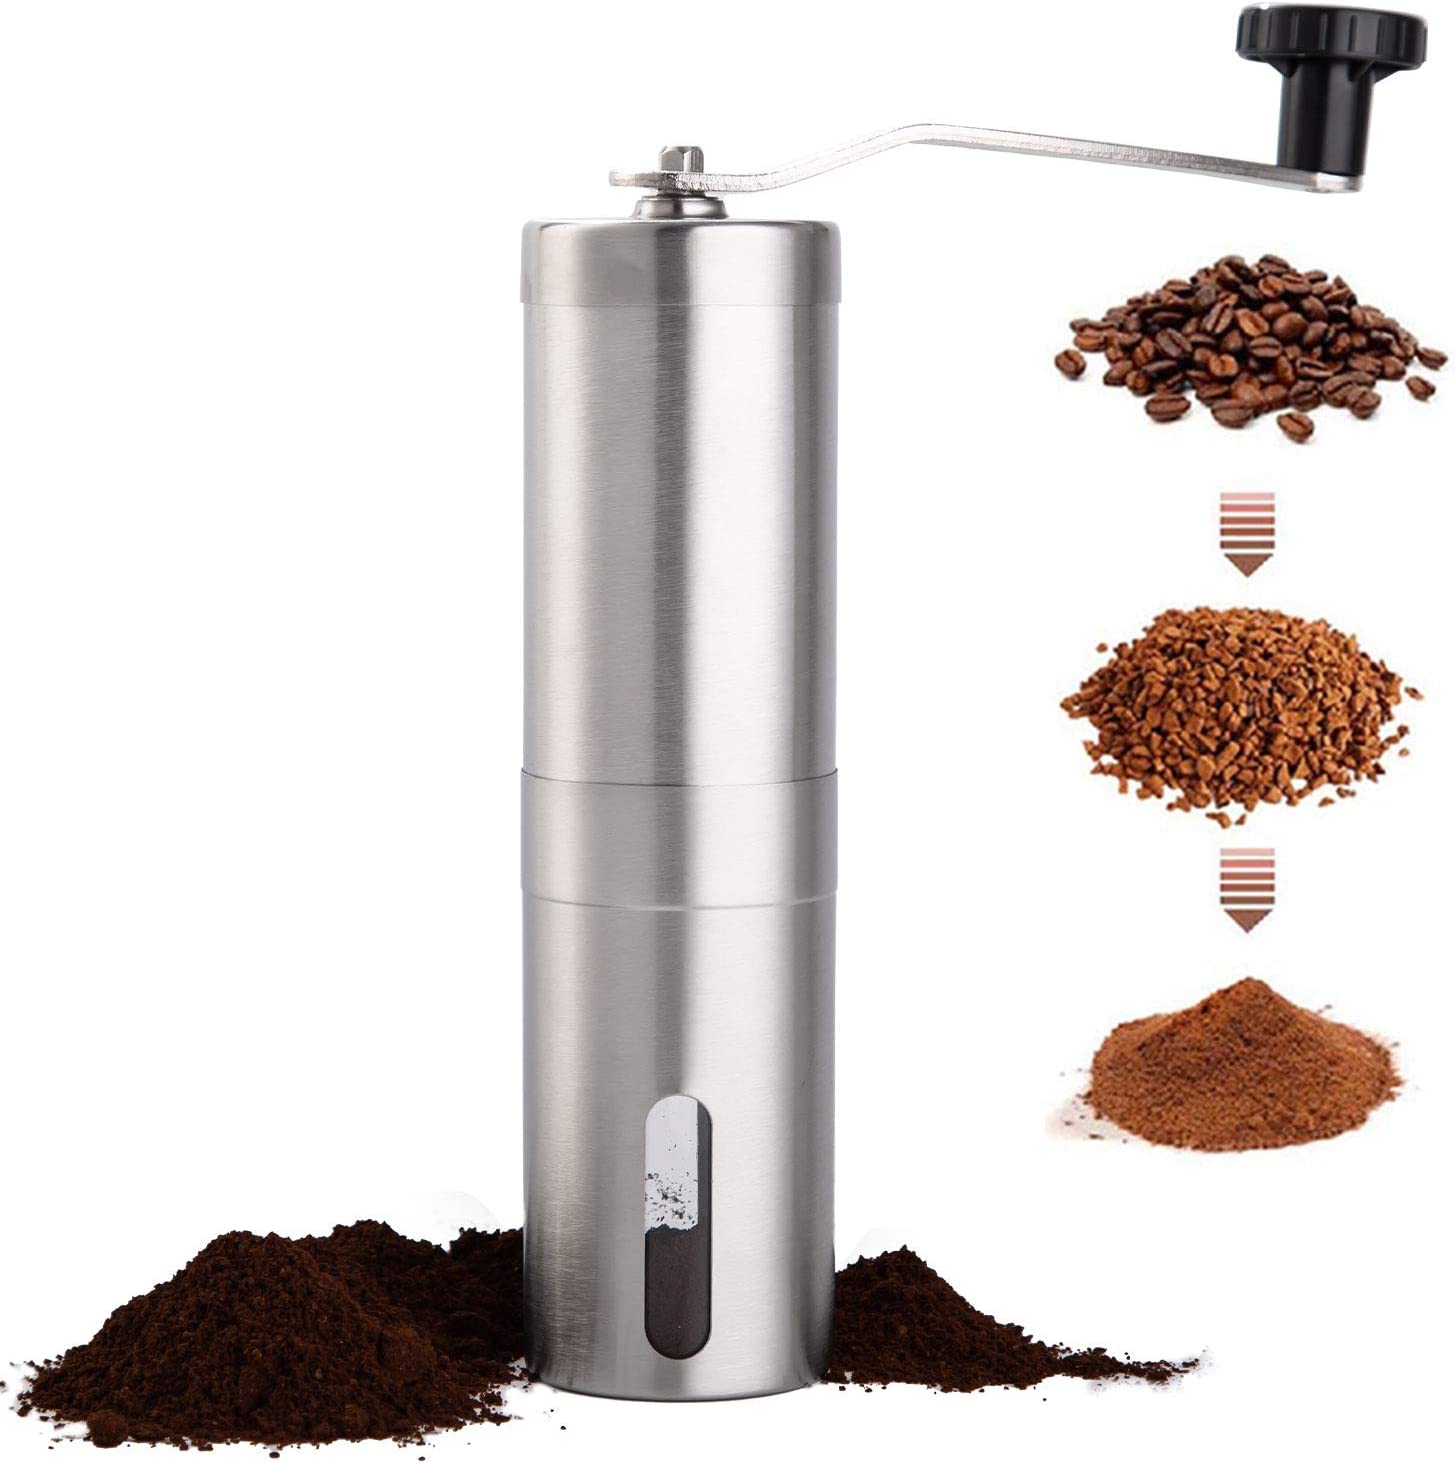 Paracity Manual Stainless Steel Coffee Grinder Ceramic Grinder for Aeropress, Filter Coffee, Espresso, French Press, Turkey Brew, Coffee Gift